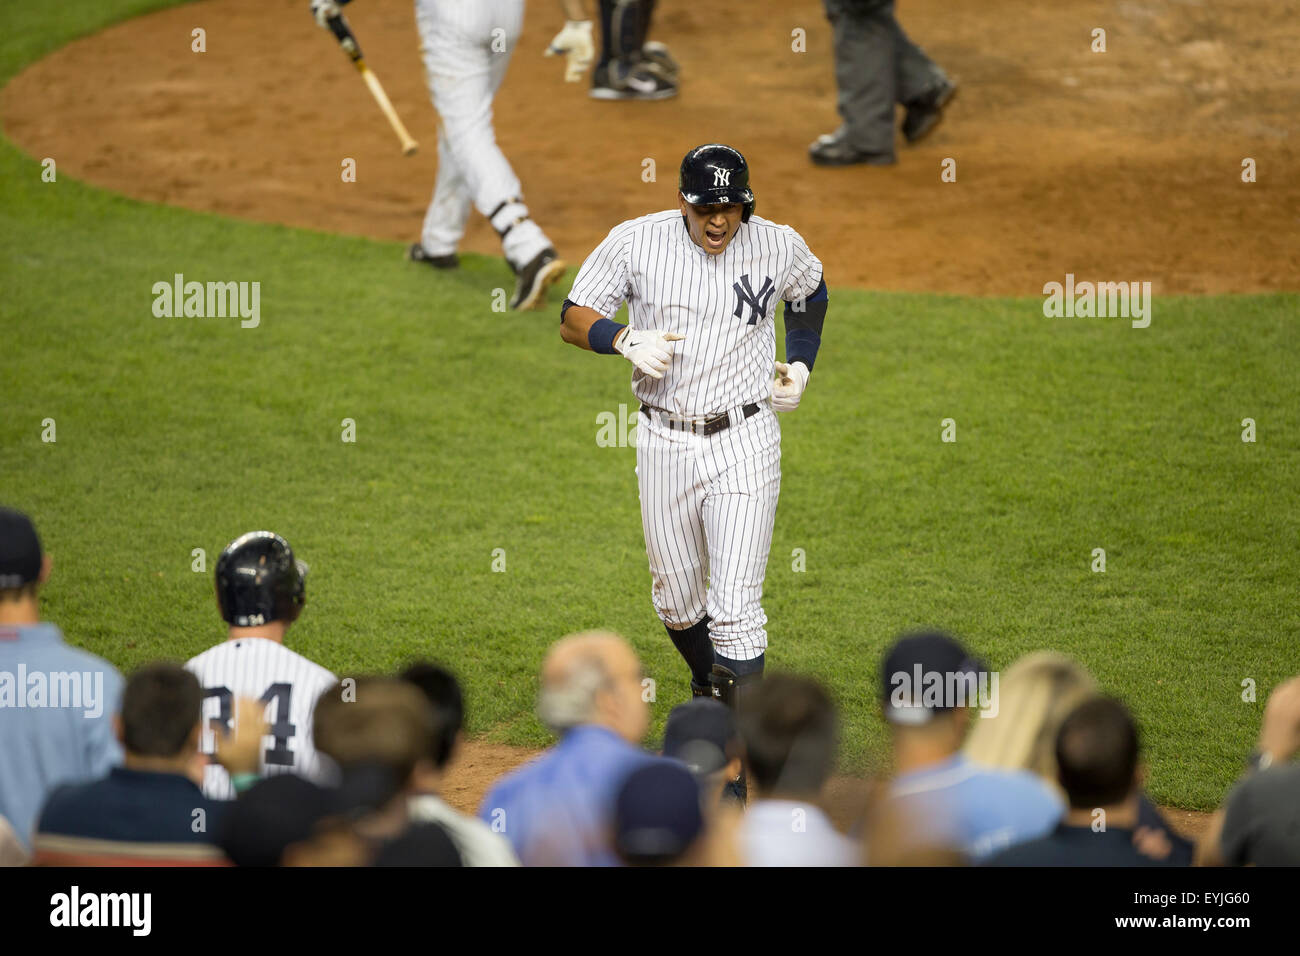 the Bronx, New York, USA. 17th July, 2015. Alex Rodriguez (Yankees), JULY 17, 2015 - MLB : Alex Rodriguez of the New York Yankees celebrates as he goes back to the dugout after hitting a home run during the Major League Baseball game against the Seattle Mariners at Yankee Stadium in the Bronx, New York, United States. © Thomas Anderson/AFLO/Alamy Live News Stock Photo